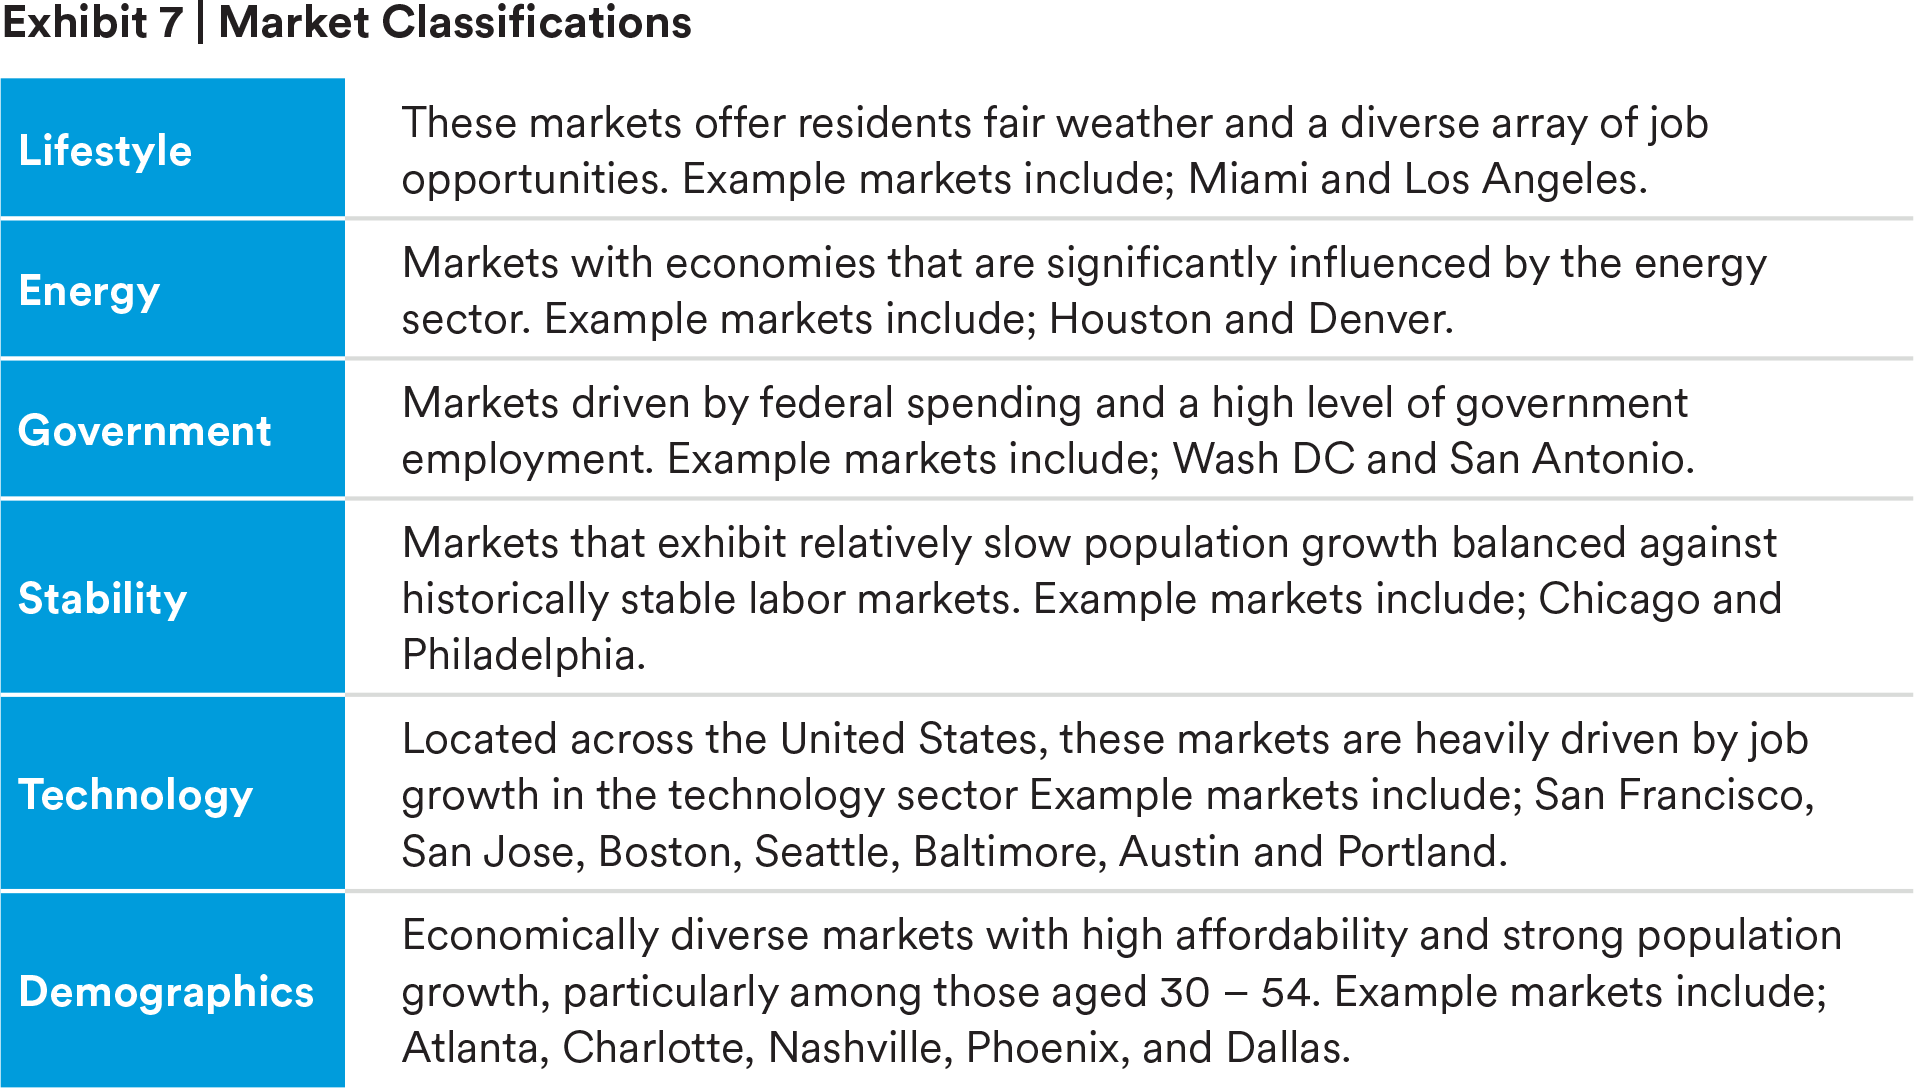 /></figure>
<!-- /wp:image -->

<!-- wp:paragraph -->
<p>Lastly, the commercial real estate sector’s potential diversification benefits are often supplemented by tenants in a wide array of industries. As a result, asset level incomes are often resilient and high levels of vacancy in properties with diversified and stable tenancy are rare, even in times of slow economic growth.</p>
<!-- /wp:paragraph -->

<!-- wp:paragraph -->
<p>In summary, core real estate can be a highly attractive option for investors seeking to diversify their portfolios by asset class, and also those seeking diversification within an asset class. In addition to diversification, commercial real estate can also offer insurance company investors options for more tax efficient investment returns.</p>
<!-- /wp:paragraph -->

<!-- wp:heading {